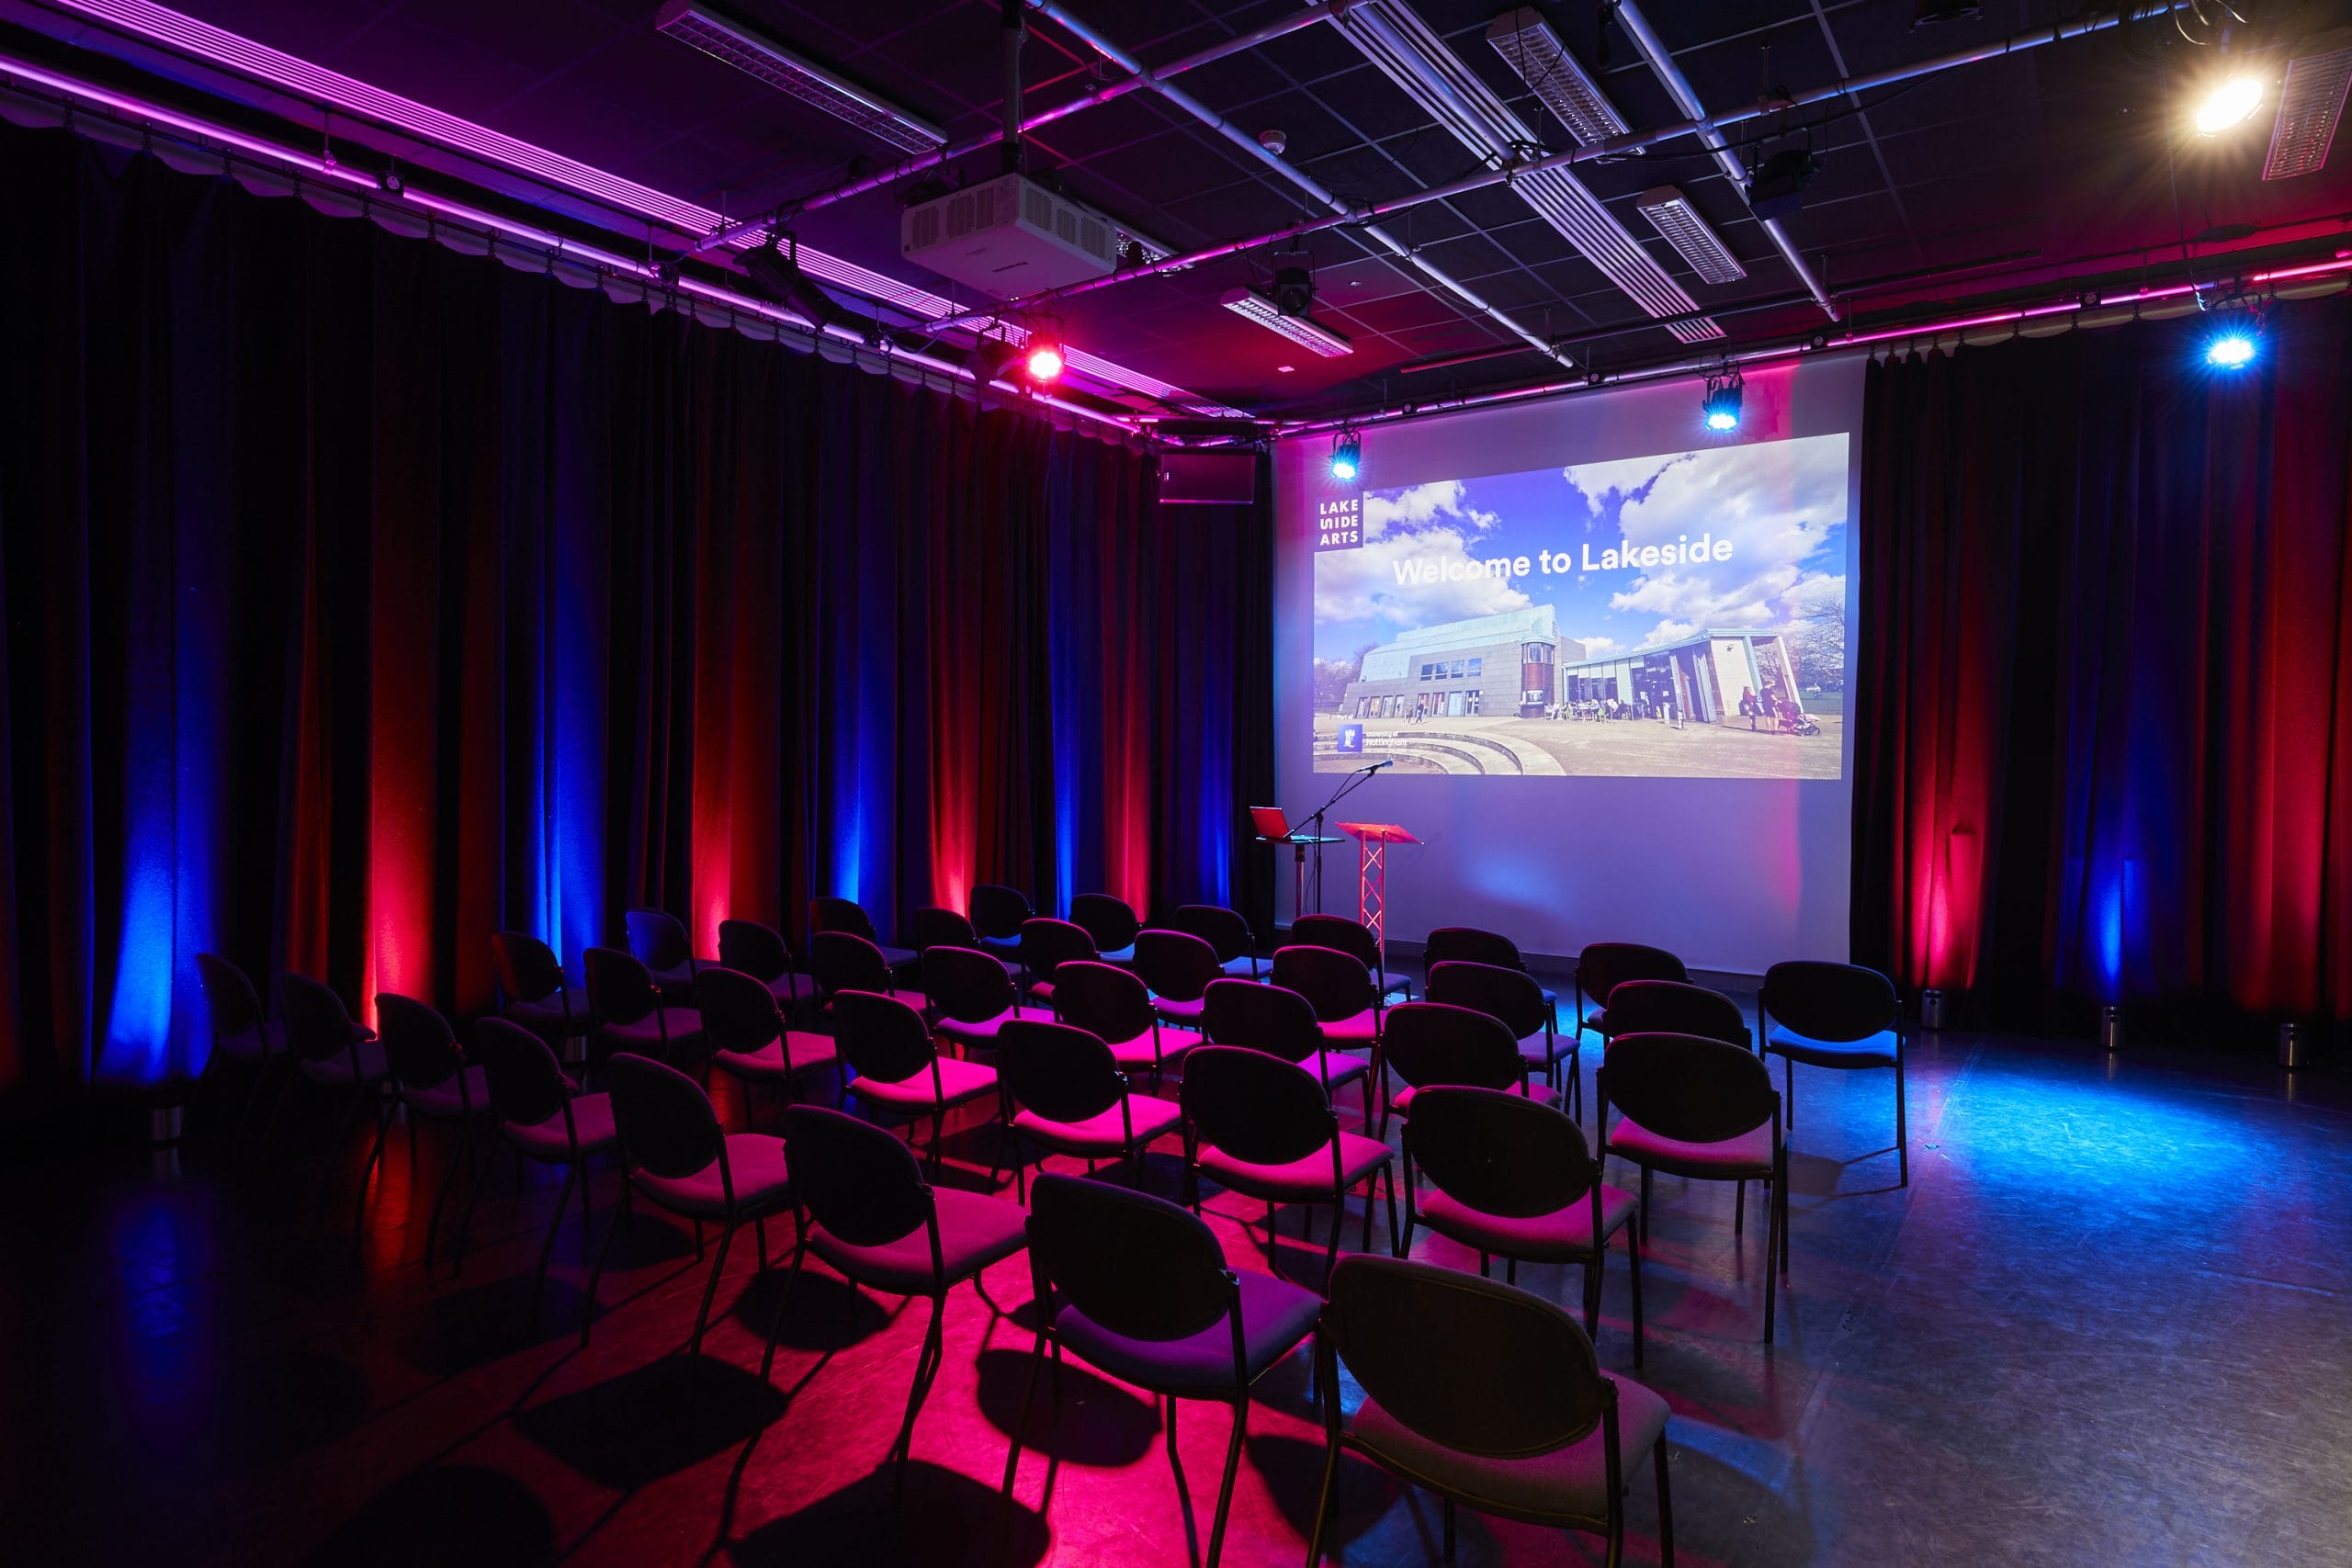 A studio space lit up with red and blue lights. Chair look at a big screen.